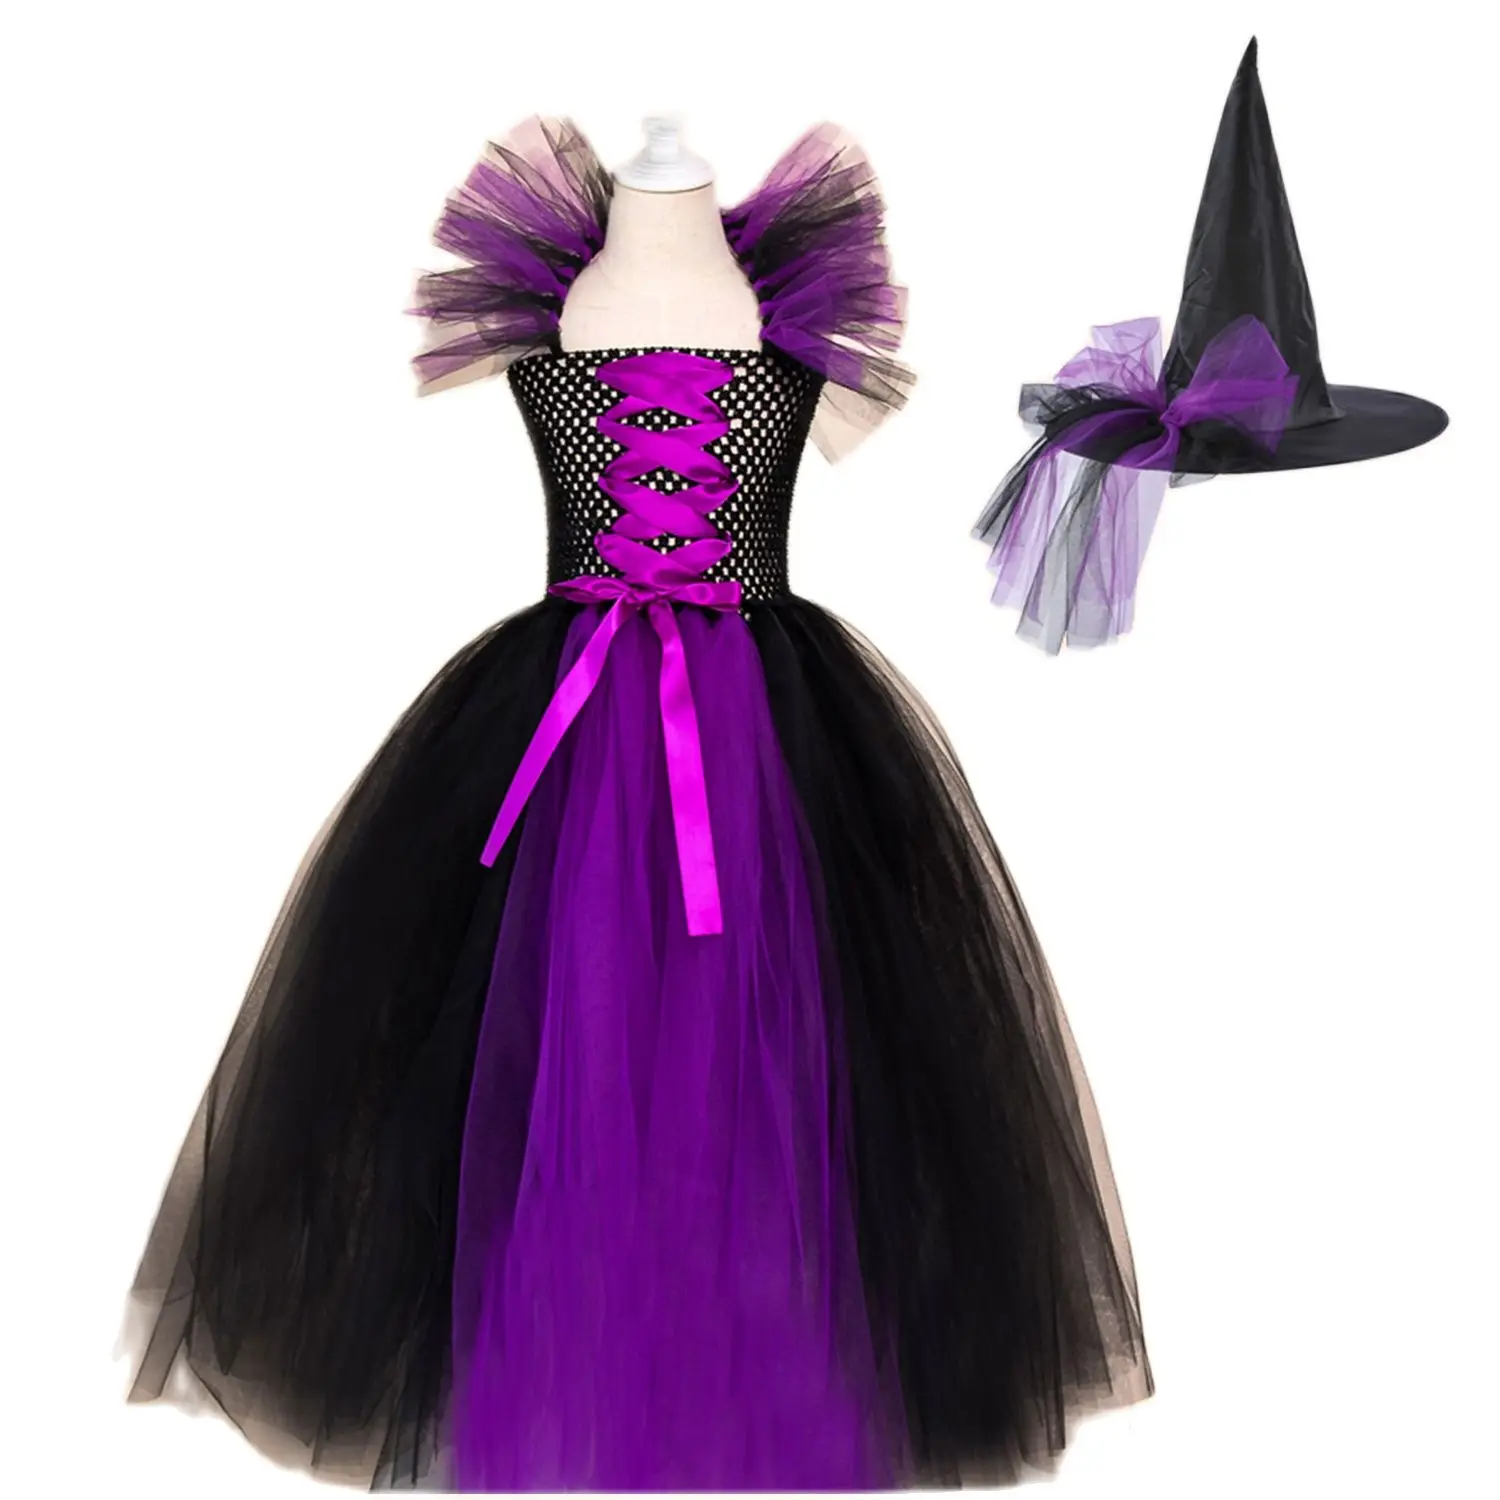 

Halloween Costume Deluxe Girls Fancy Party Black Glam Gown Tutu Dress Kids Demon Queen Witch Clothes